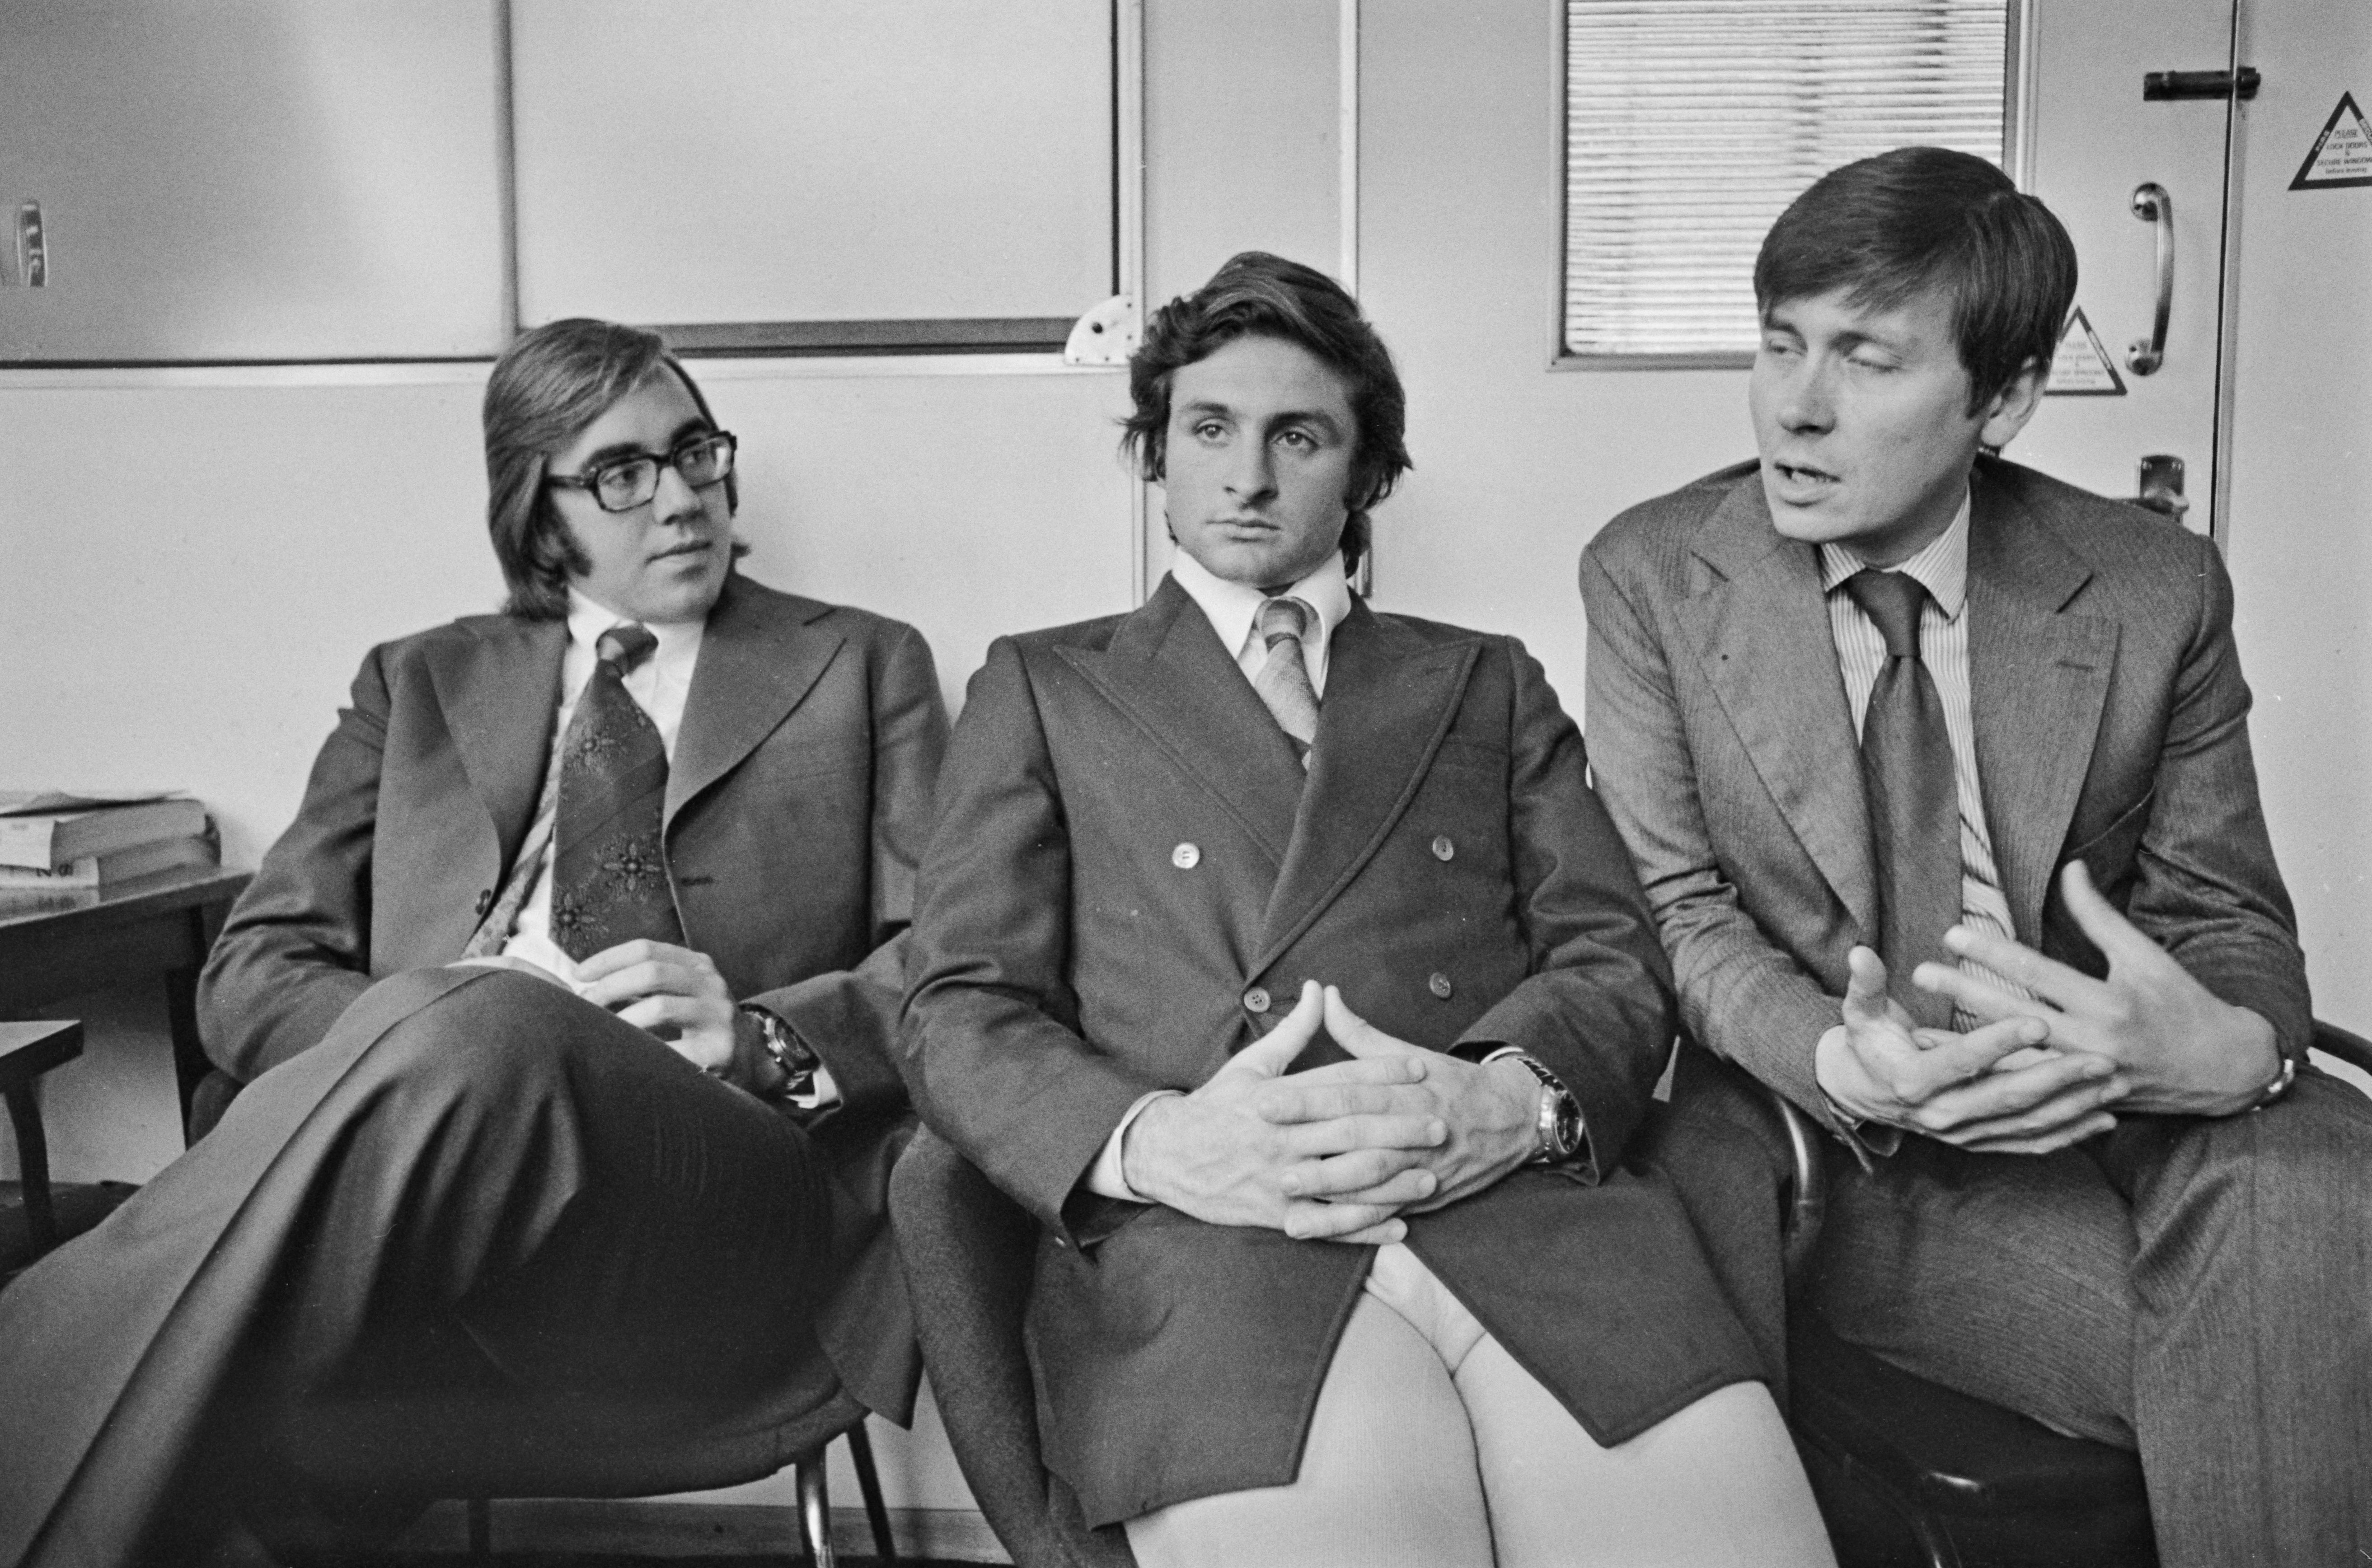 Nando Parrado, left, and Roberto Canessa, members of the Uruguayan rugby team who survived the Andes air crash, at a press conference in 1974